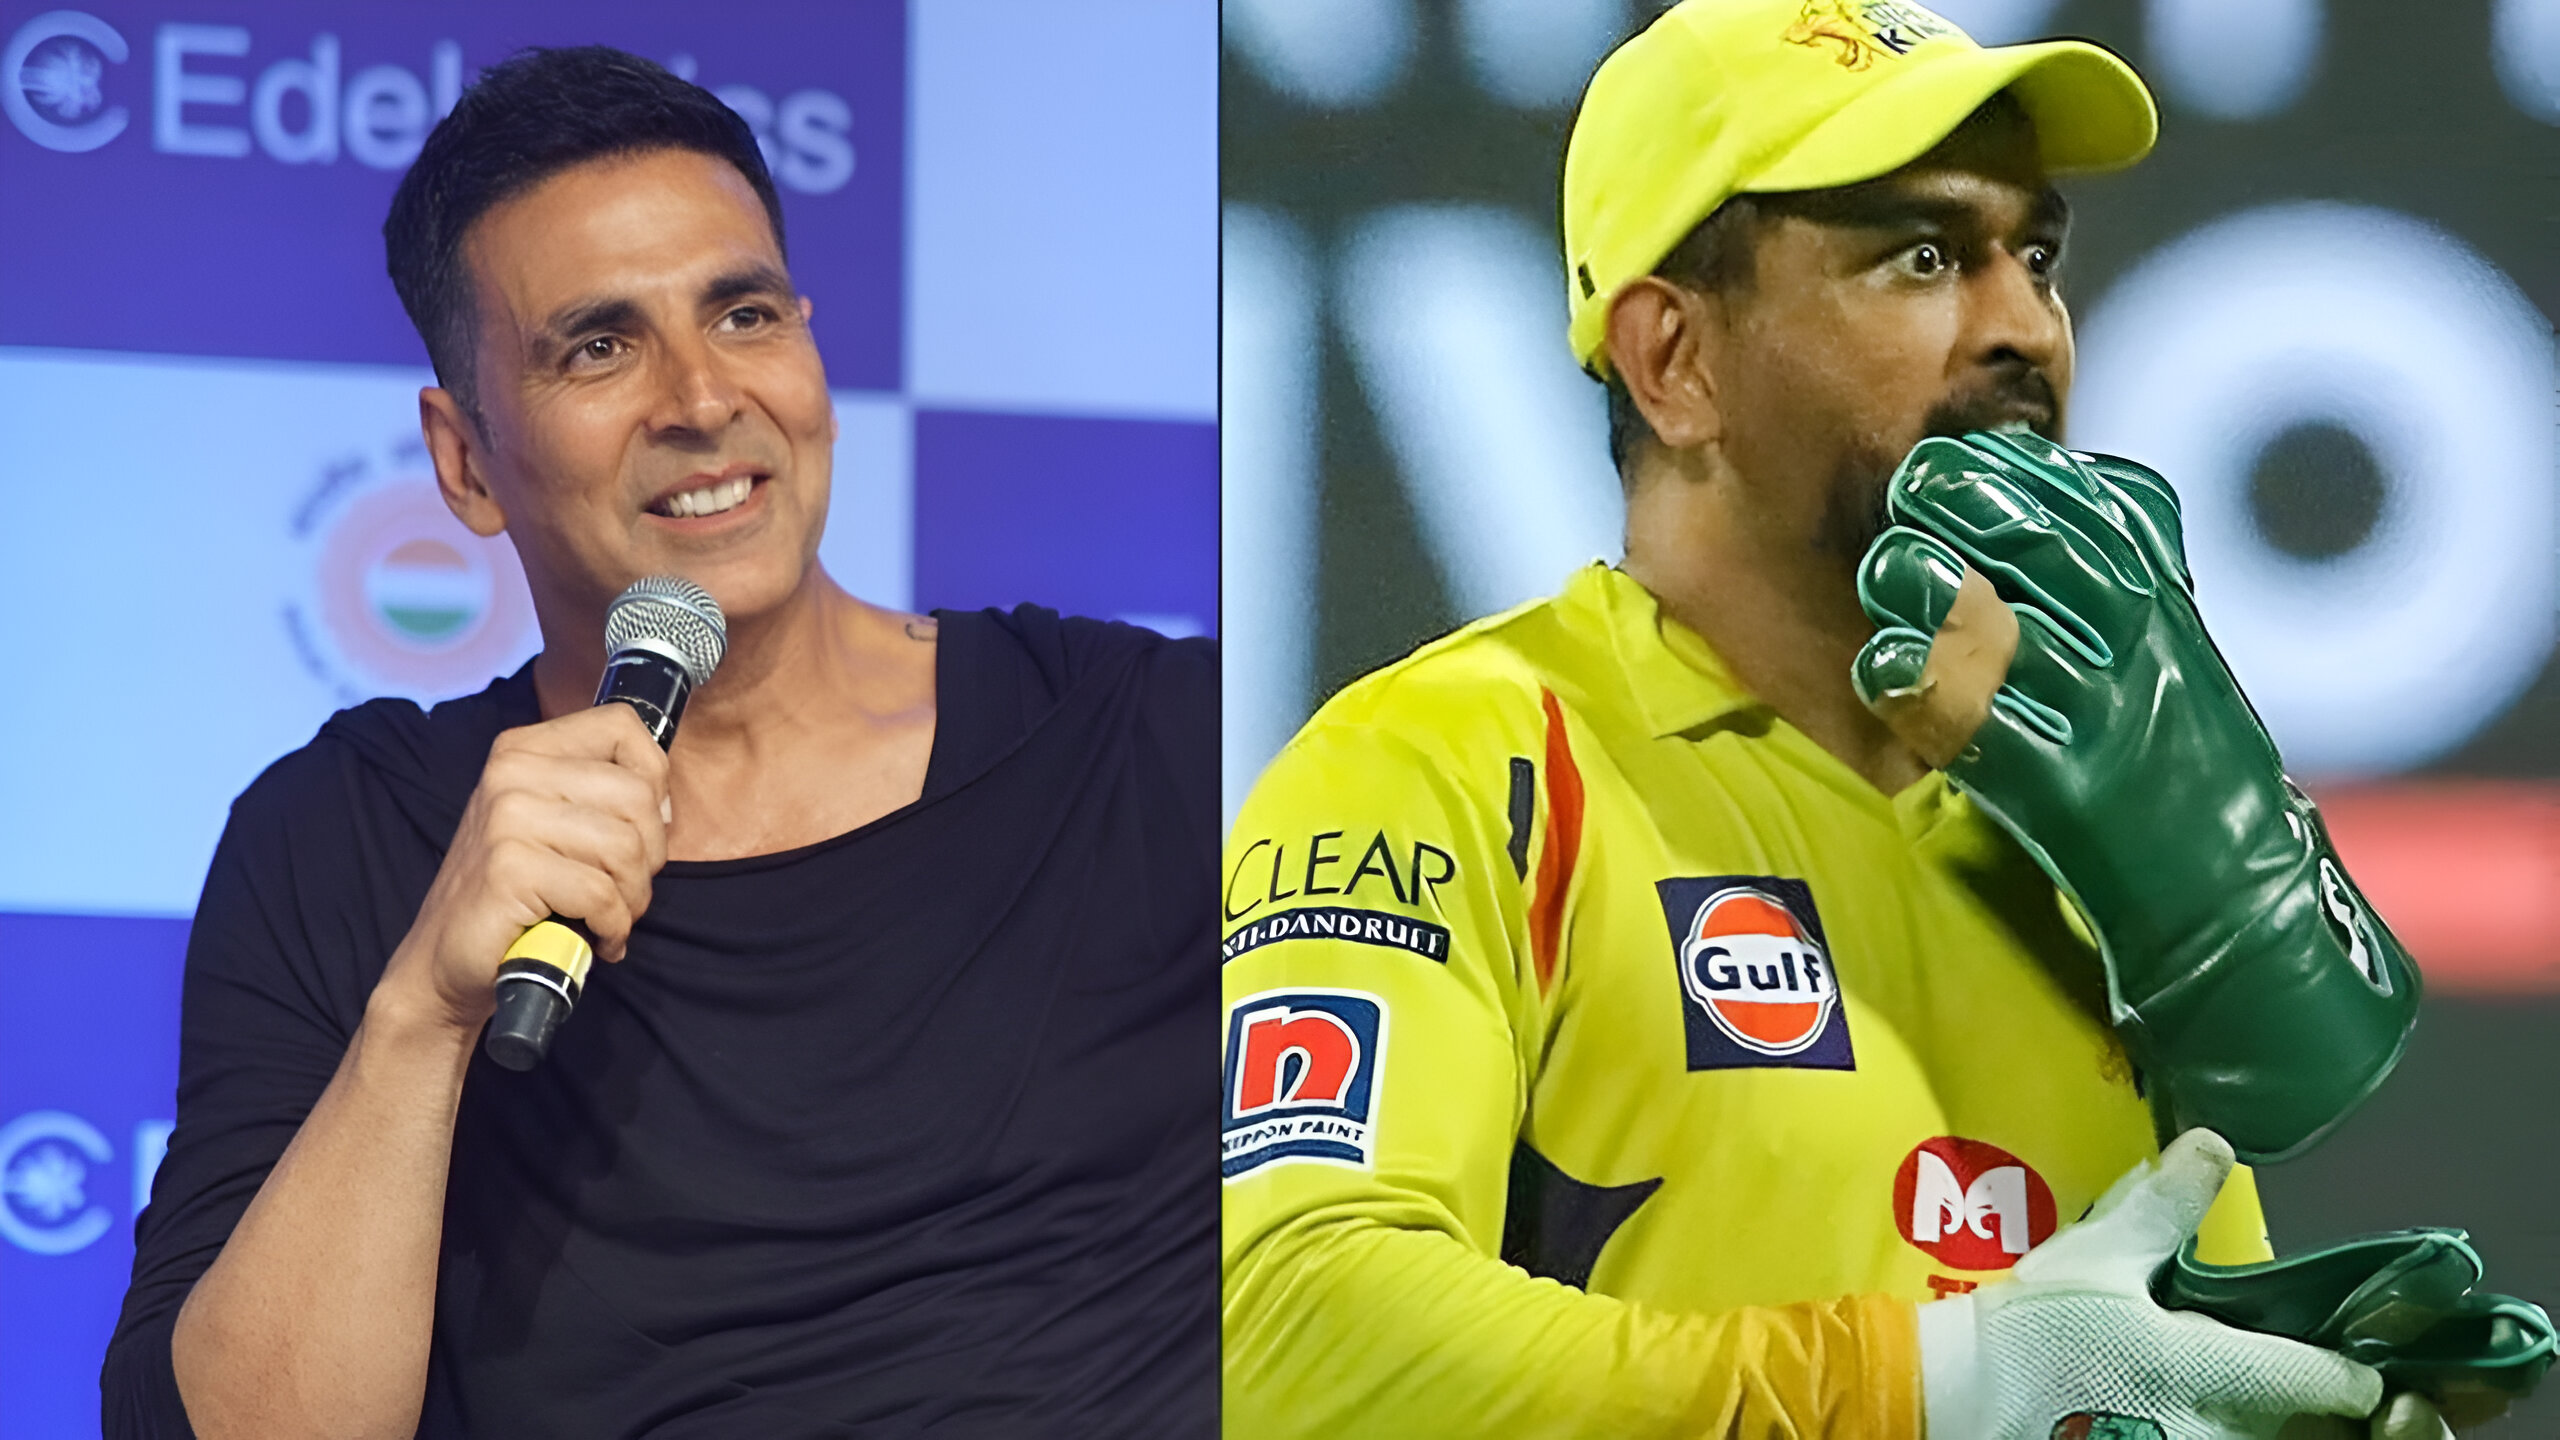 The 17th season of the IPL is proving to be as unpredictable and thrilling as ever. With the league still wide open, Bollywood actors Akshay Kumar and Tiger Shroff's predictions add an interesting twist to the ongoing speculations.